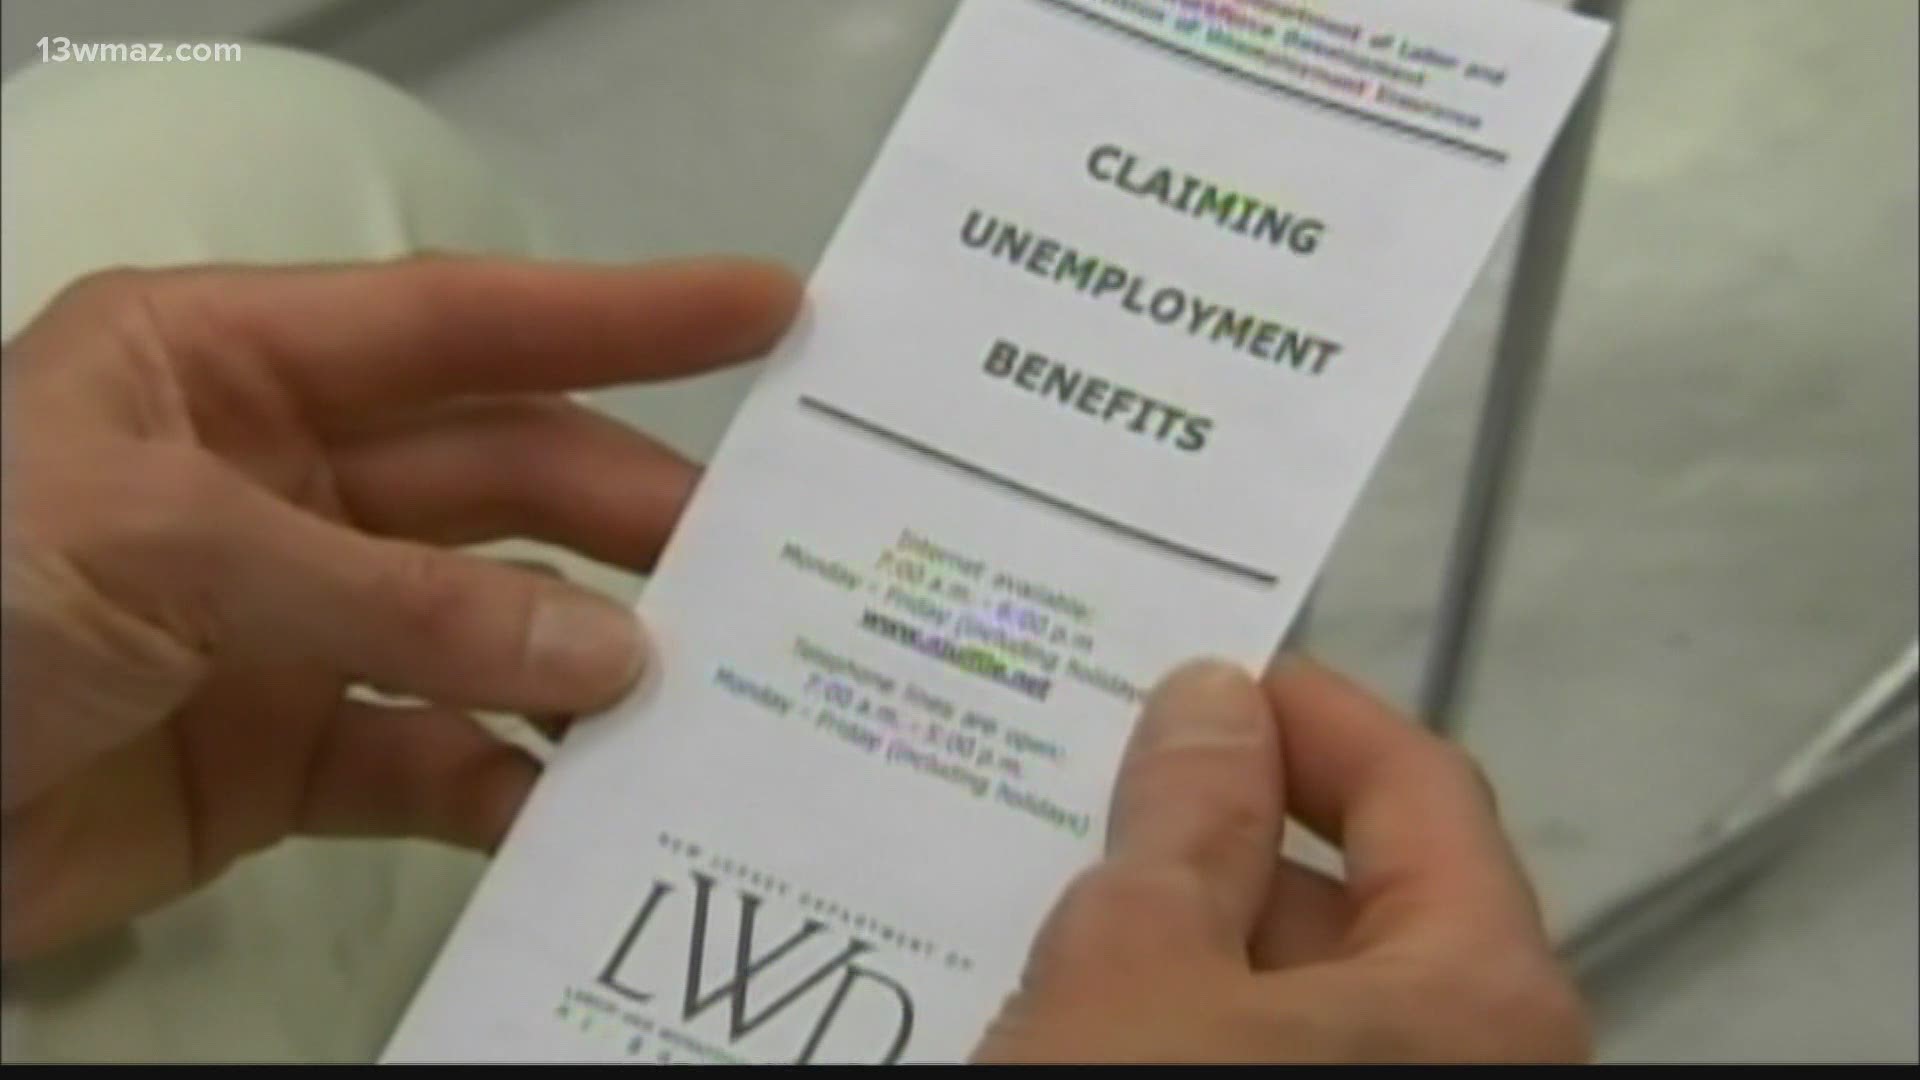 Some Central Georgians say they haven't received unemployment benefits in months and still can't get any answers from the Georgia Department of Labor.